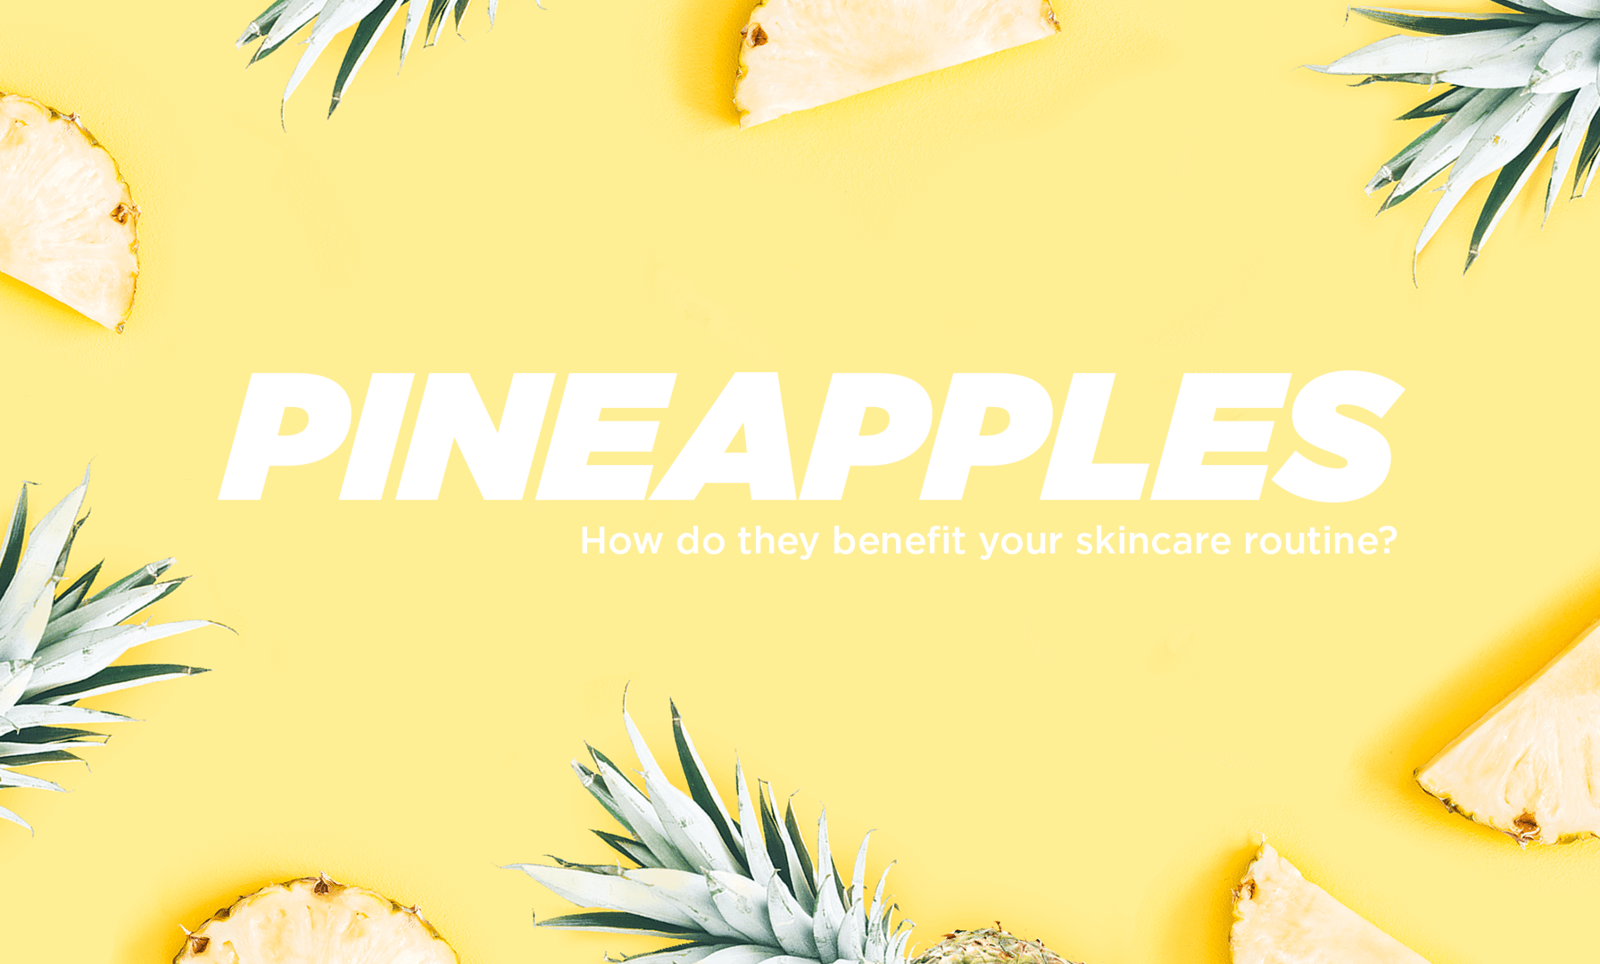 What's In Pineapple Extract And How Can It Benefit My Skin? - Vitamasques